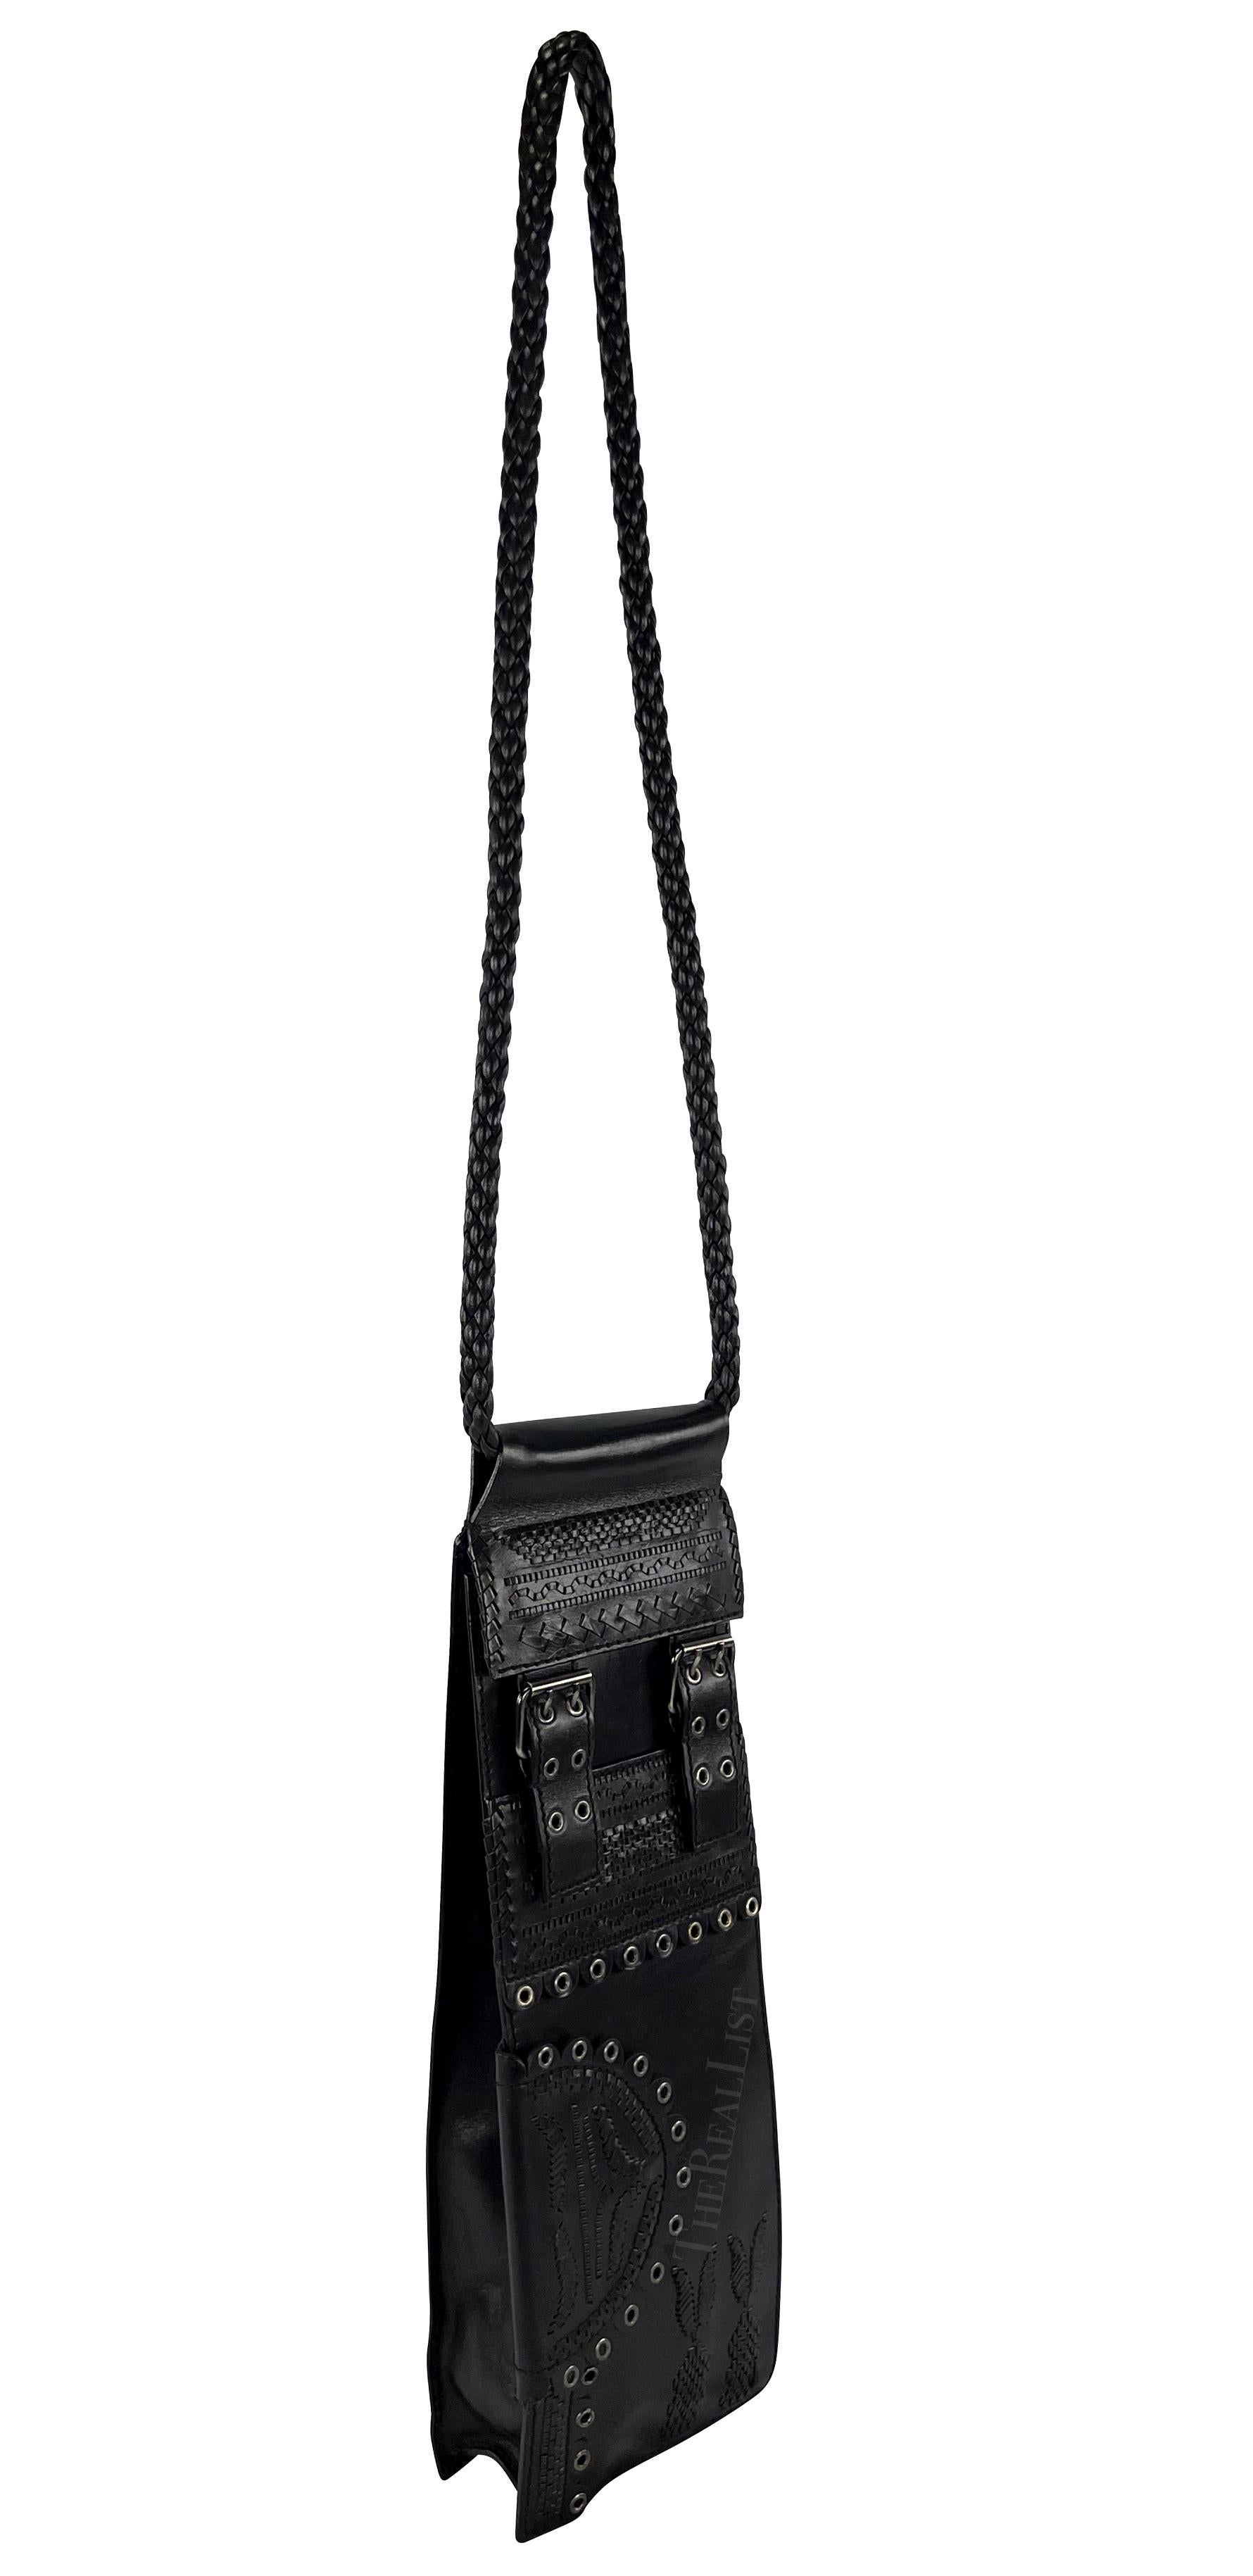 F/W 2001 Yves Saint Laurent by Tom Ford Ad Black Woven Leather Shoulder Bag For Sale 5